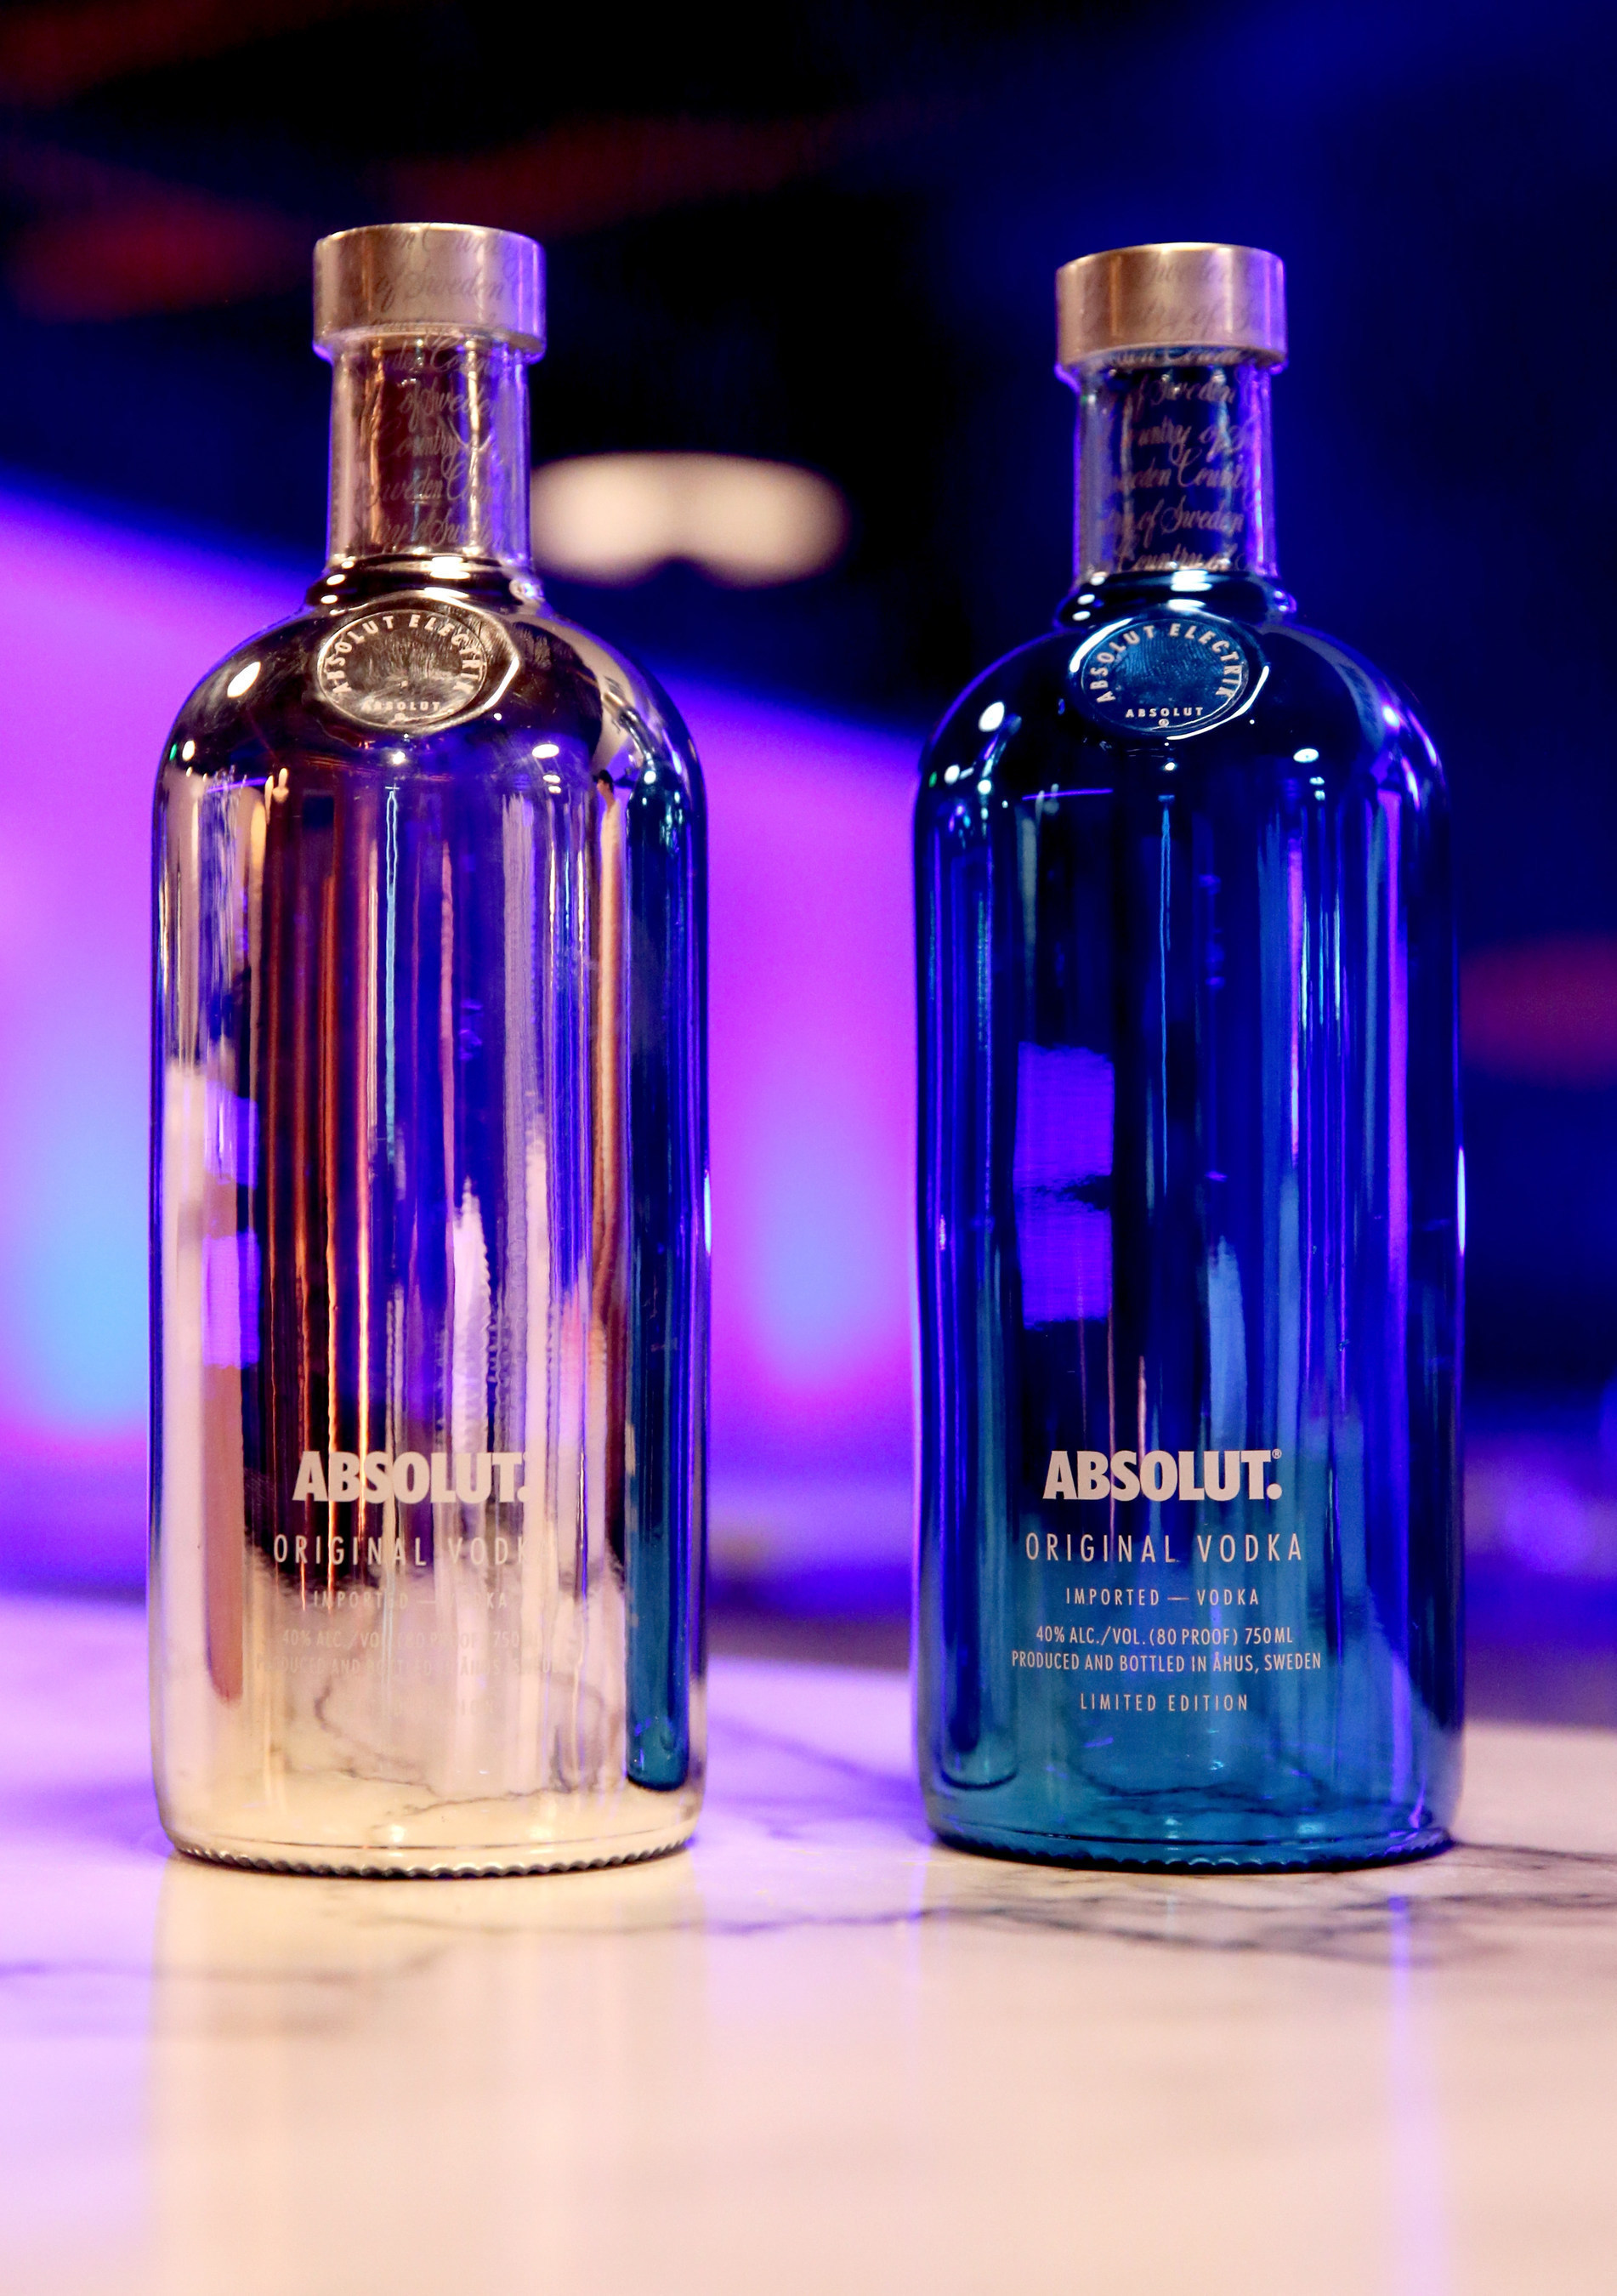 Inspired by Absolut Electrik, the vodka brand's latest limited edition bottles available in silver and electric blue, the Absolut Electrik House utilized the energy levels of house guests to unlock a series of epic rooms and experiences on October 23.  (Photo by Todd Williamson/Getty Images for Absolut)